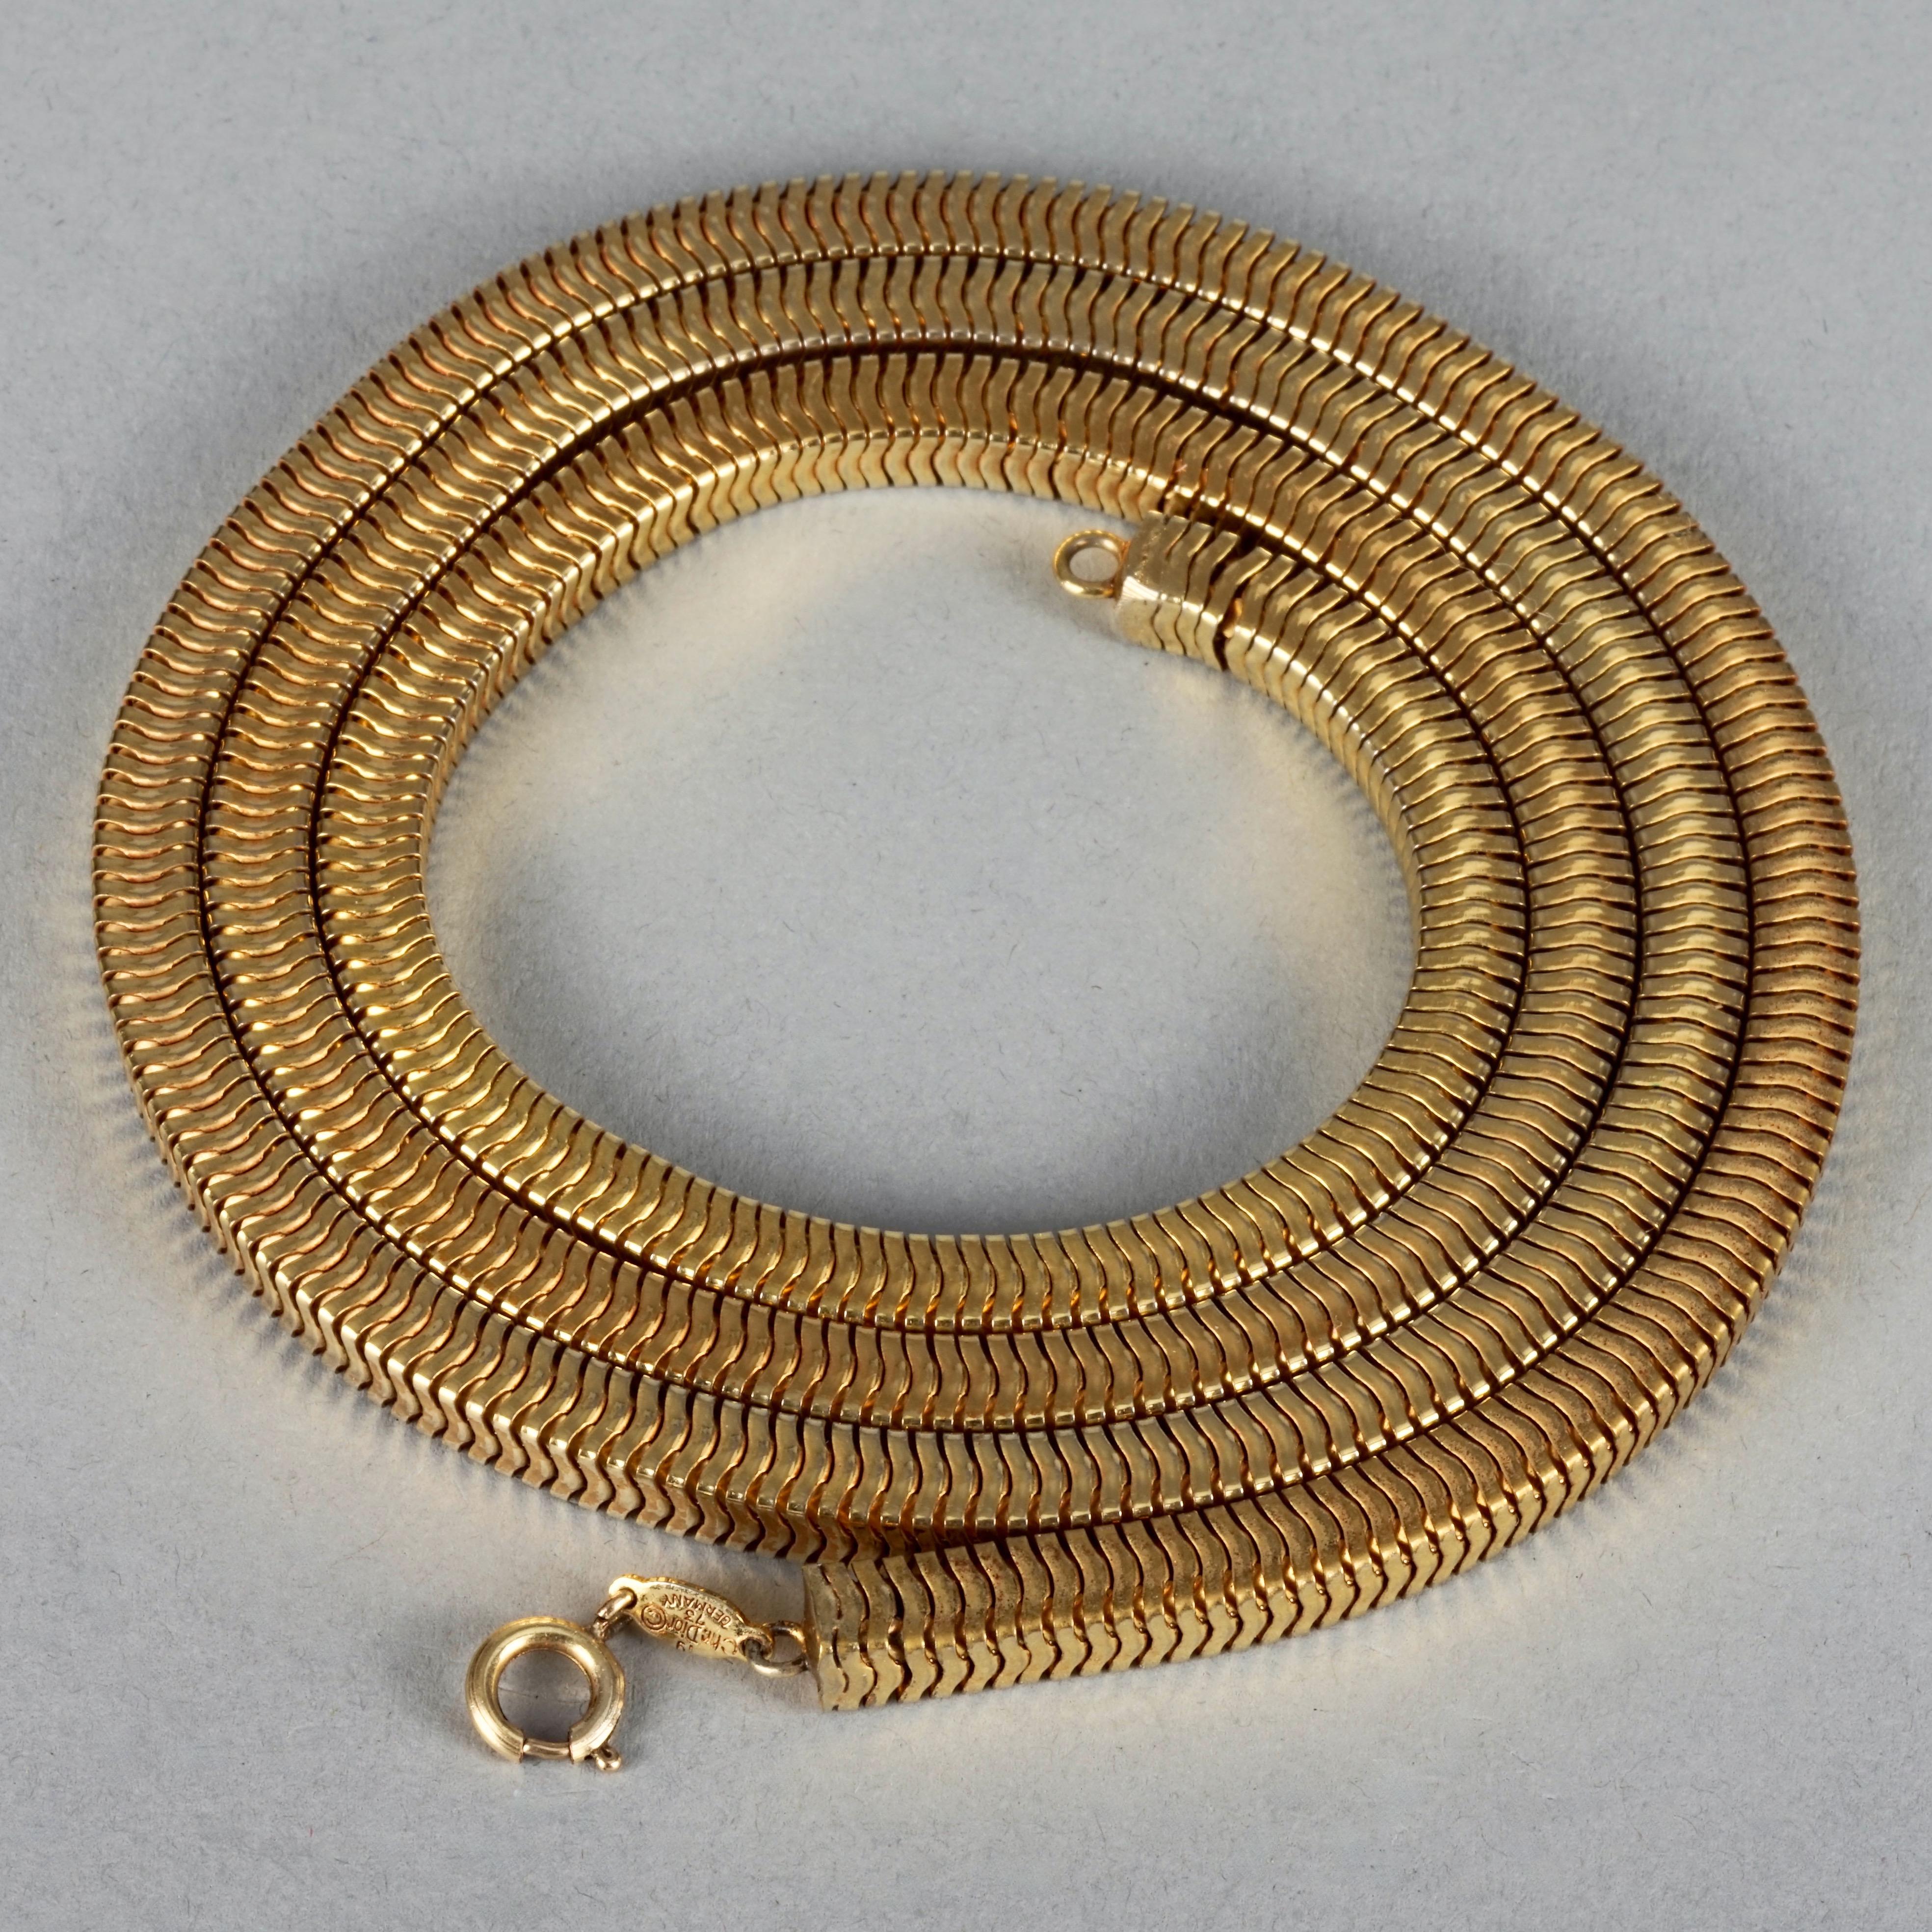 Women's Vintage 1973 CHRISTIAN DIOR Gold Snake Chain Necklace